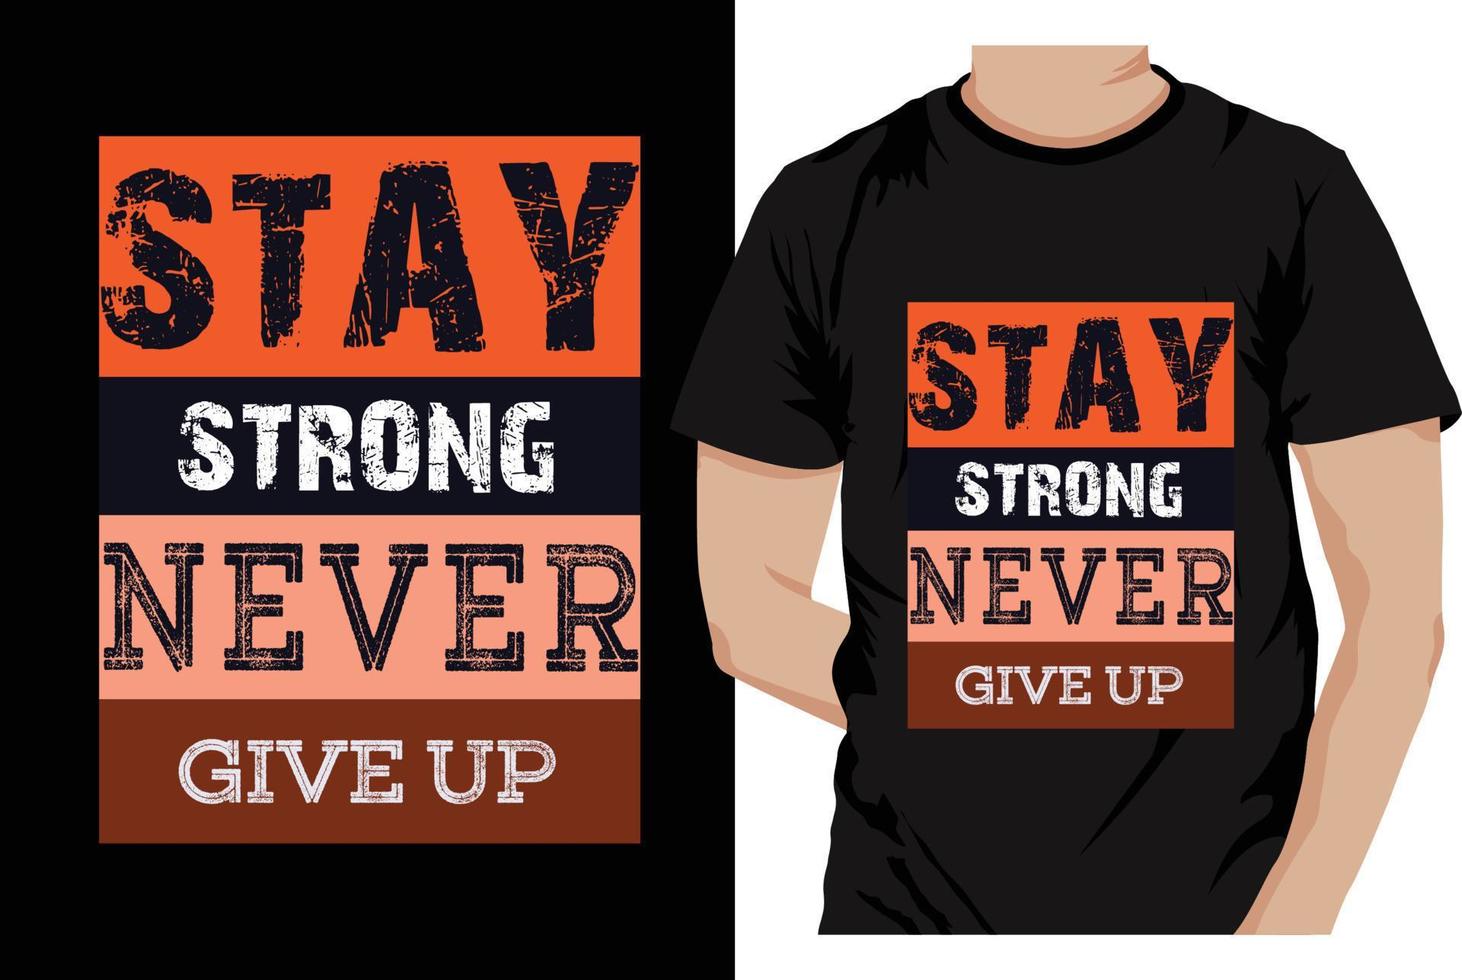 Stay Strong Never Give Up Typography T-Shirt Design Vector. Motivational and inspirational message. vector